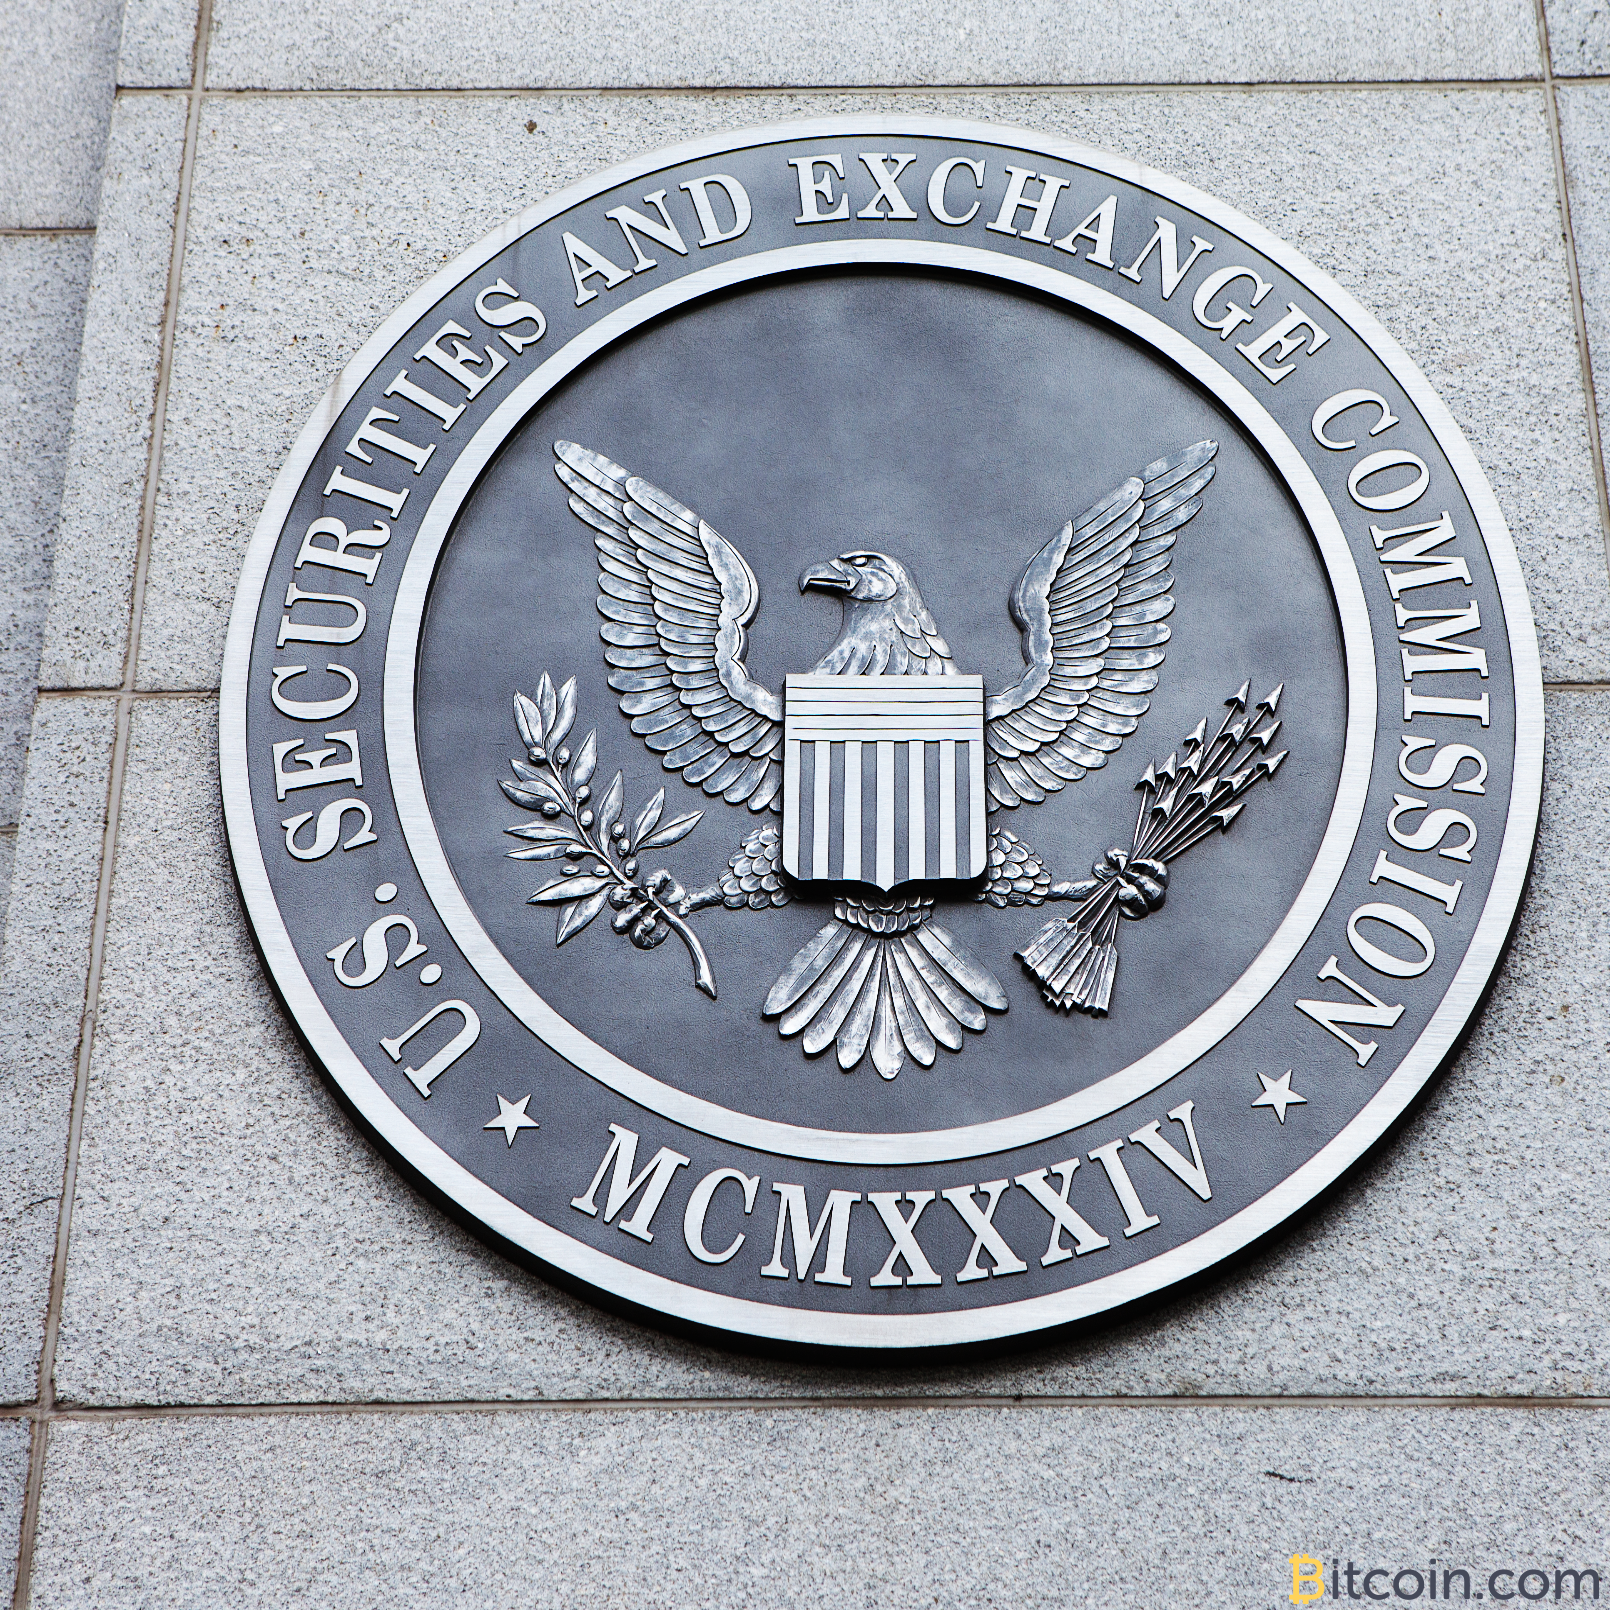 SEC Suspends Trading of Three Companies With Ties to Cryptocurrency